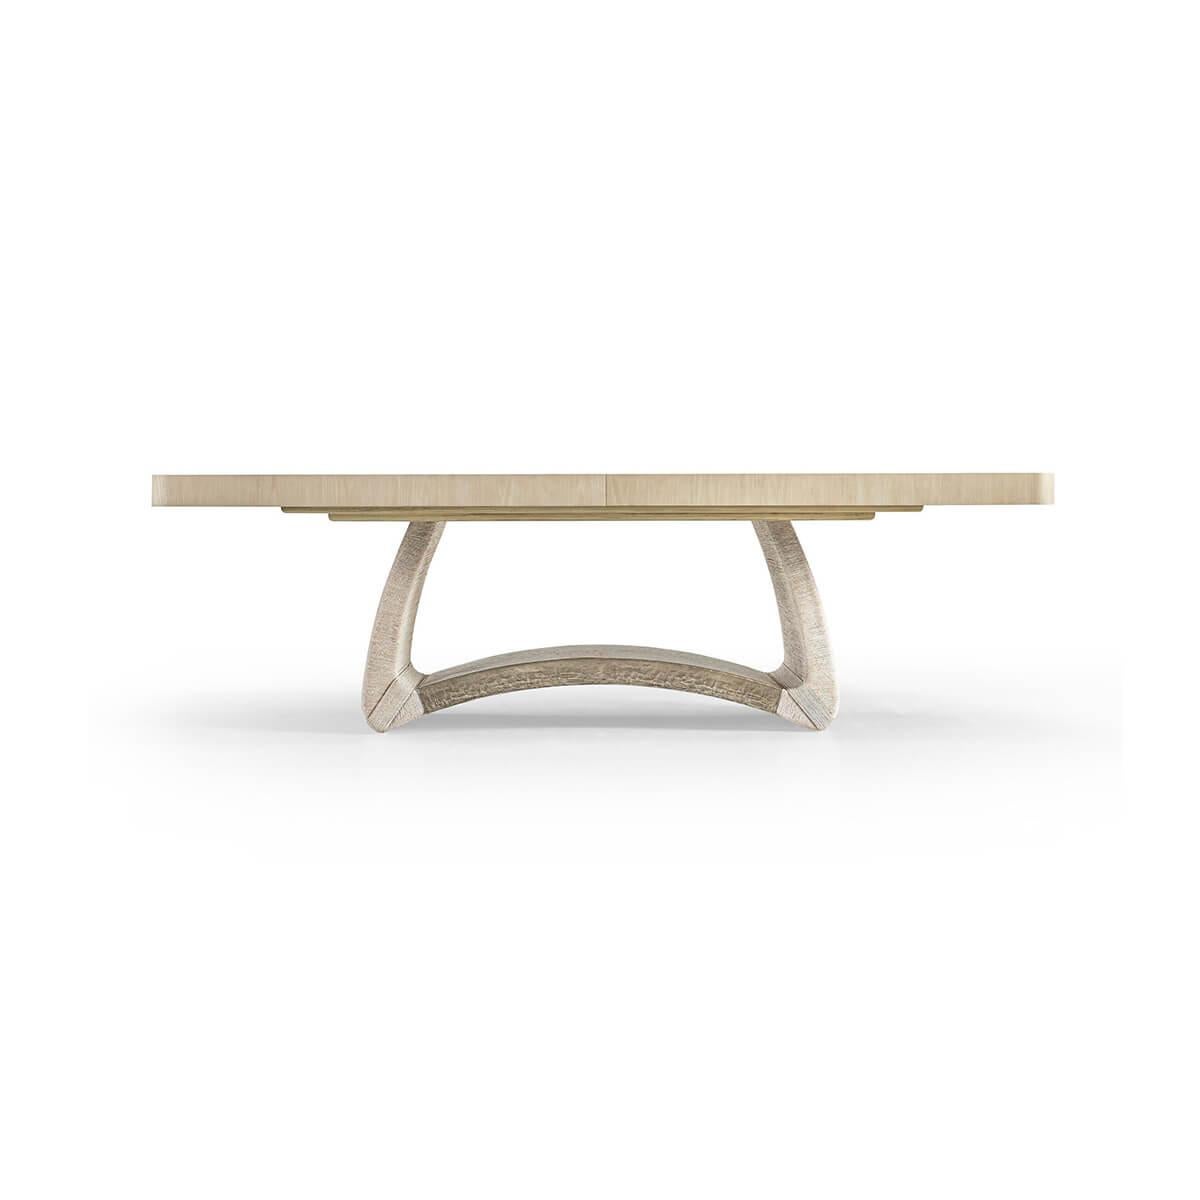 Inspired by 40s and 50s Danish design, the table features a loping pedestal wrapped in Whitewashed Danish Cord. A Bleached Oak top extends to 120” and adds understated elegance, complimented by a stainless steel base in a white satin finish. The